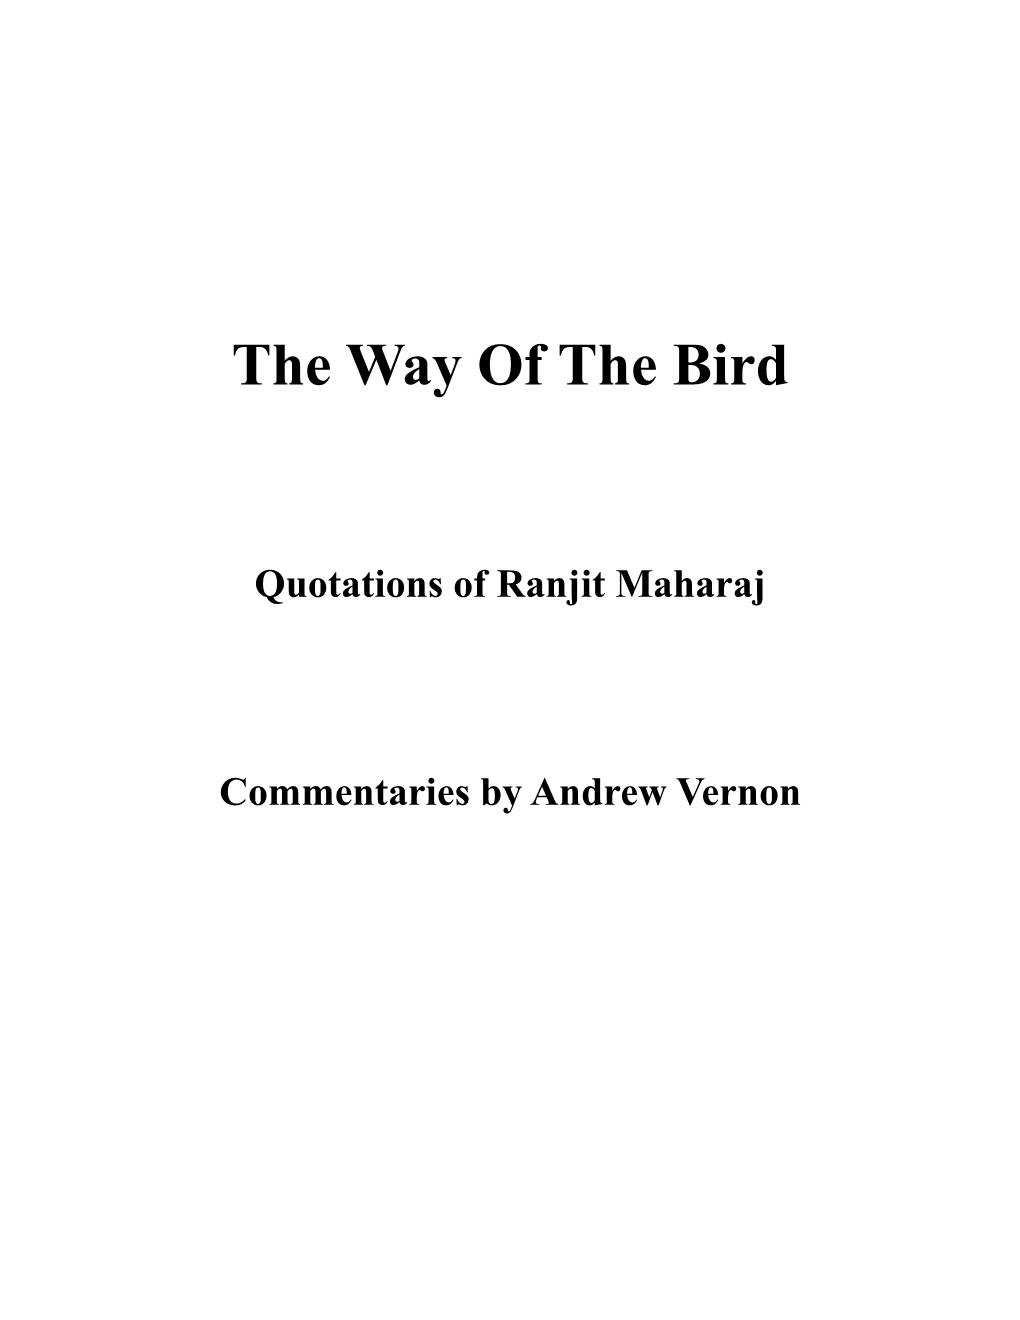 Maharaj R and Vernon a the Way of the Bird